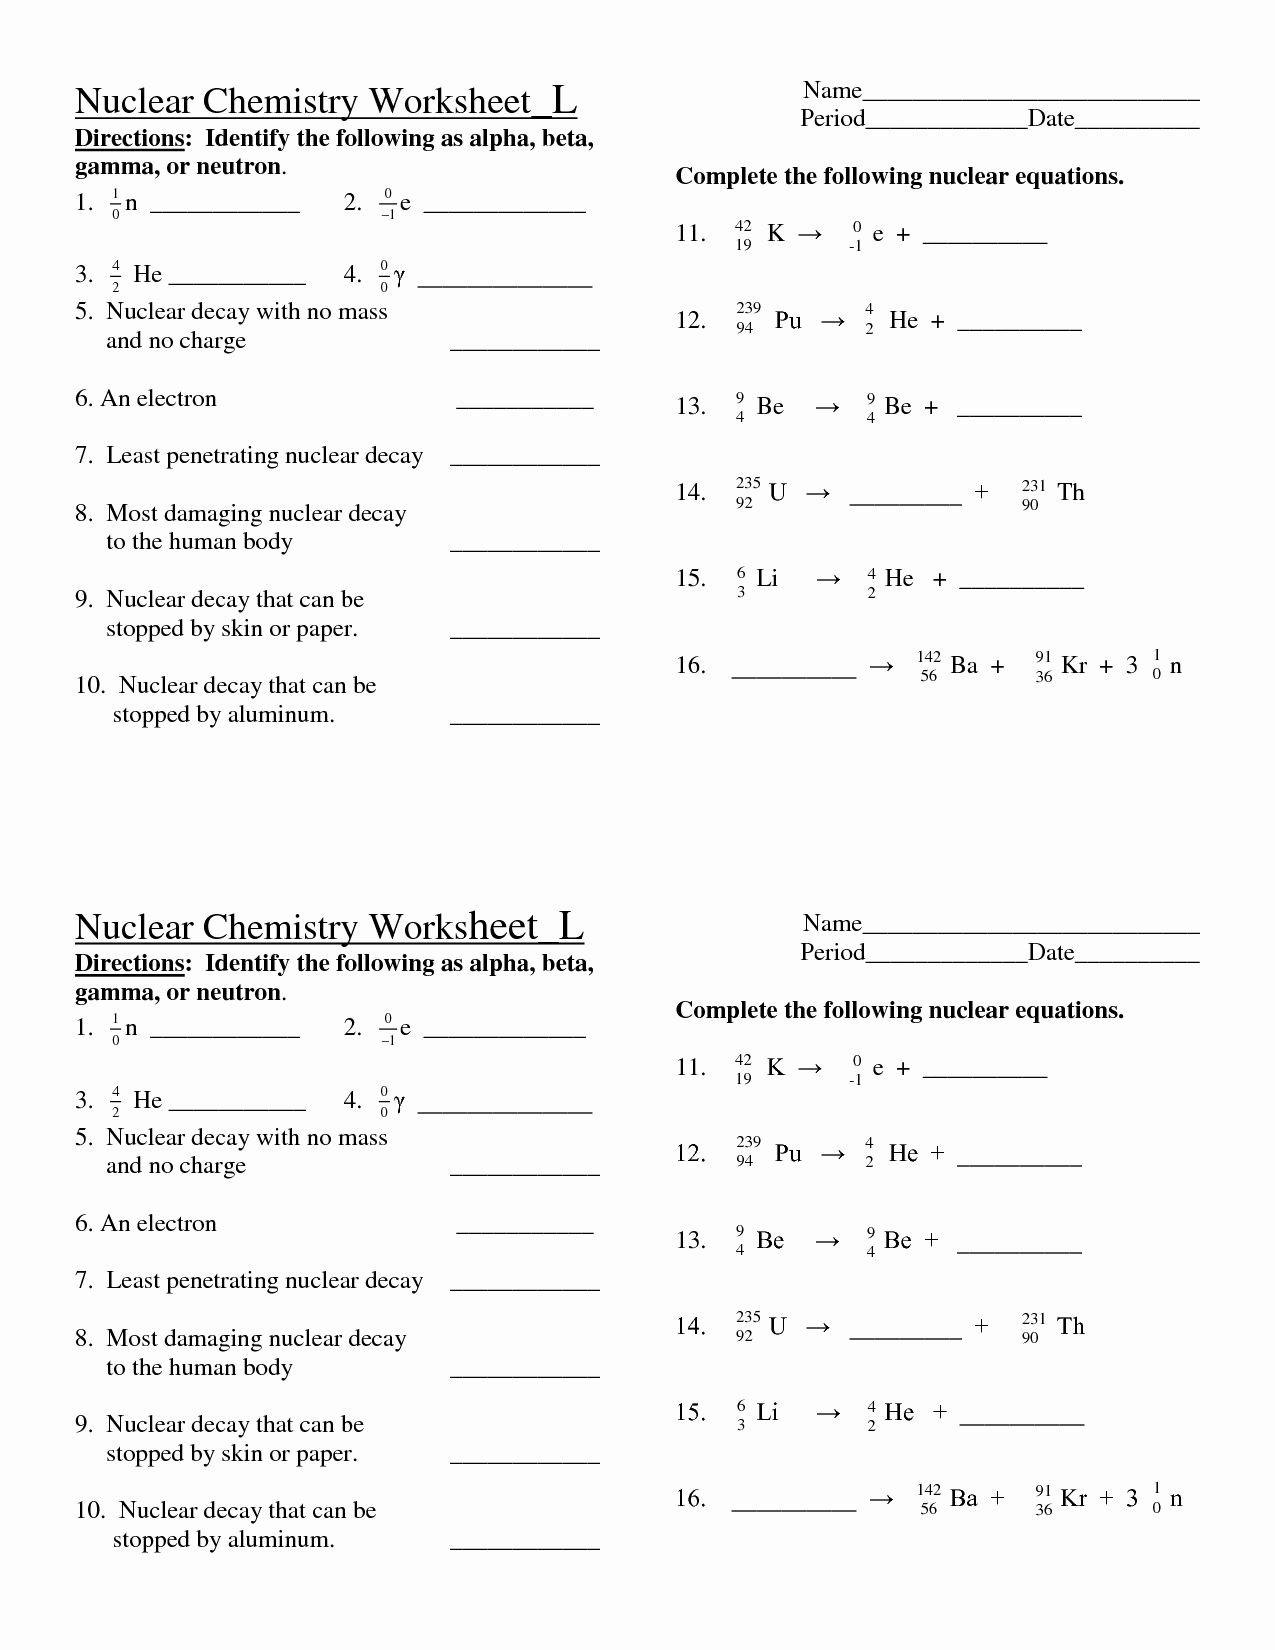 Nuclear Decay Worksheet Answers Key 50 Nuclear Chemistry Worksheet Answer Key In 2020